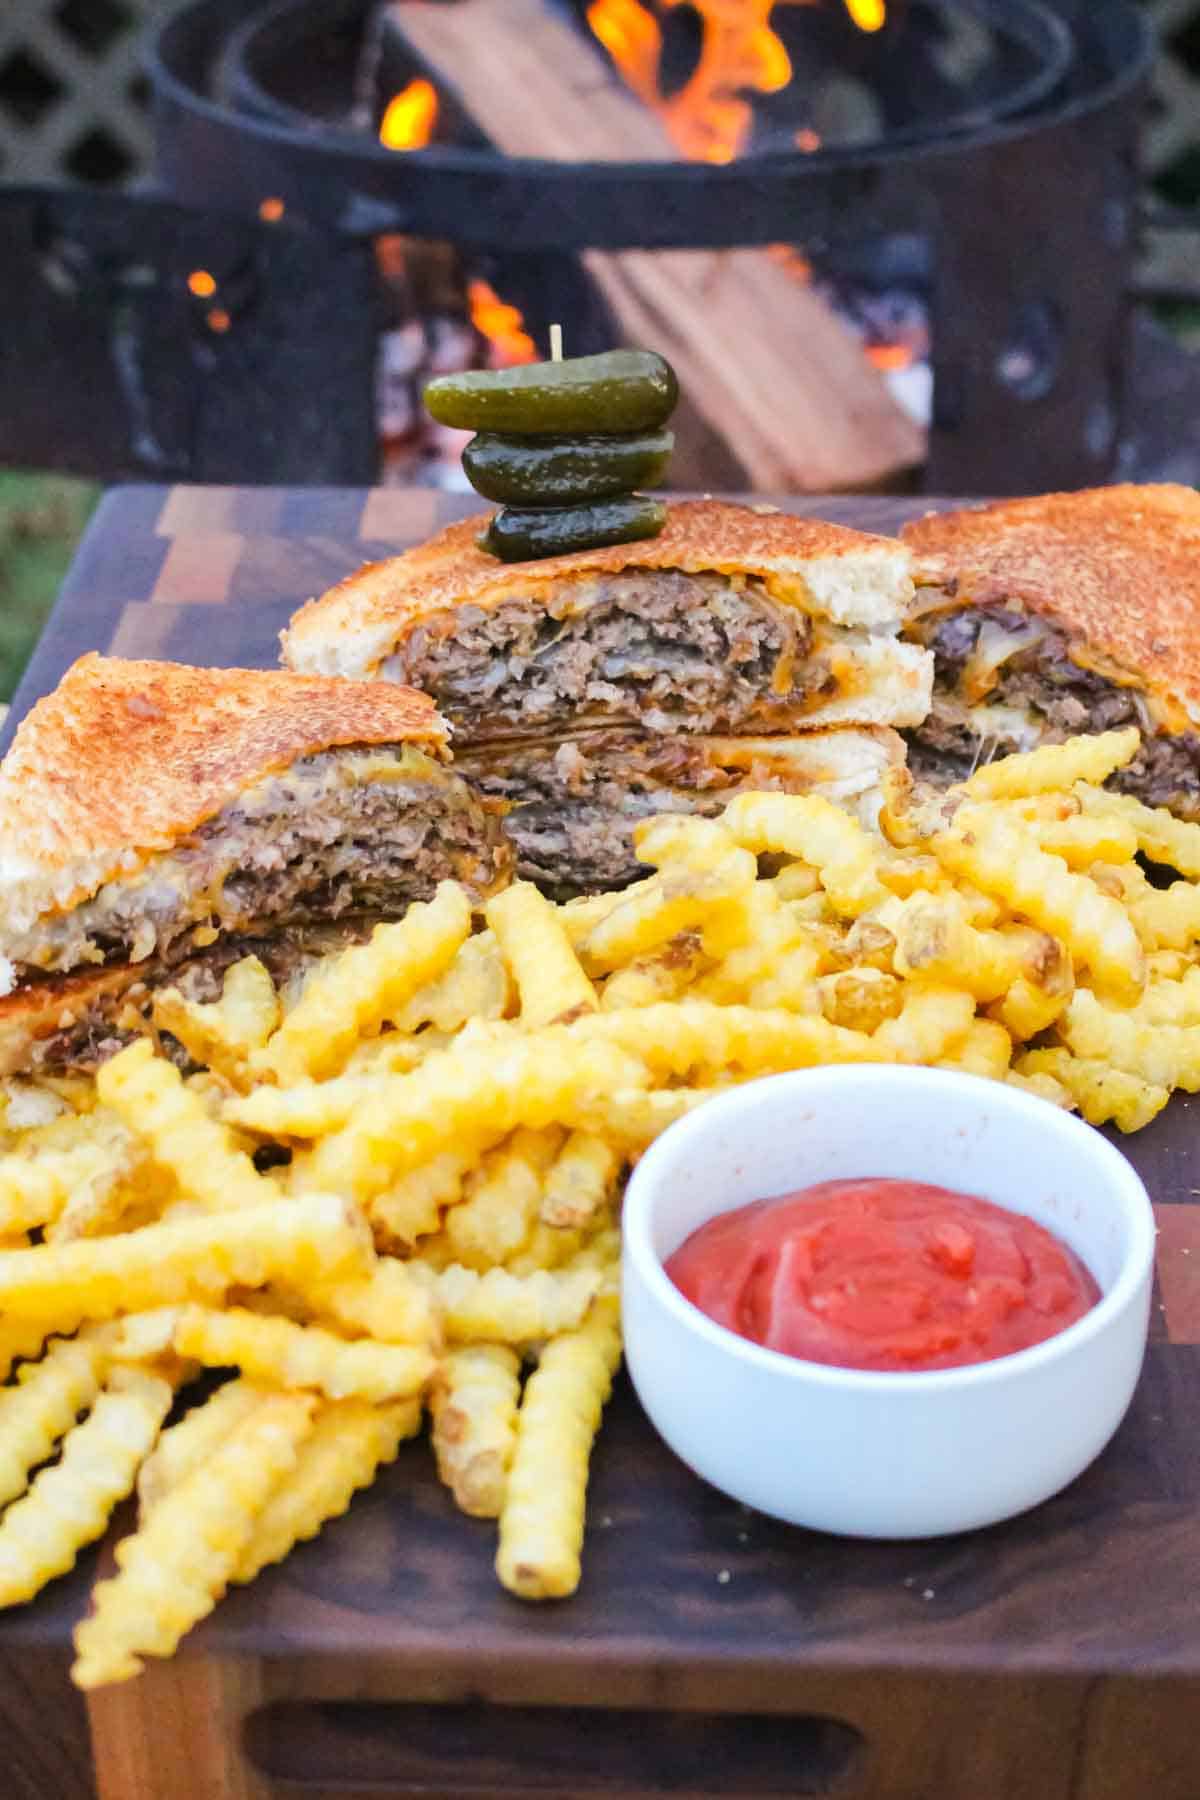 The French Onion Patty Melts Plated with fries on a cutting board.